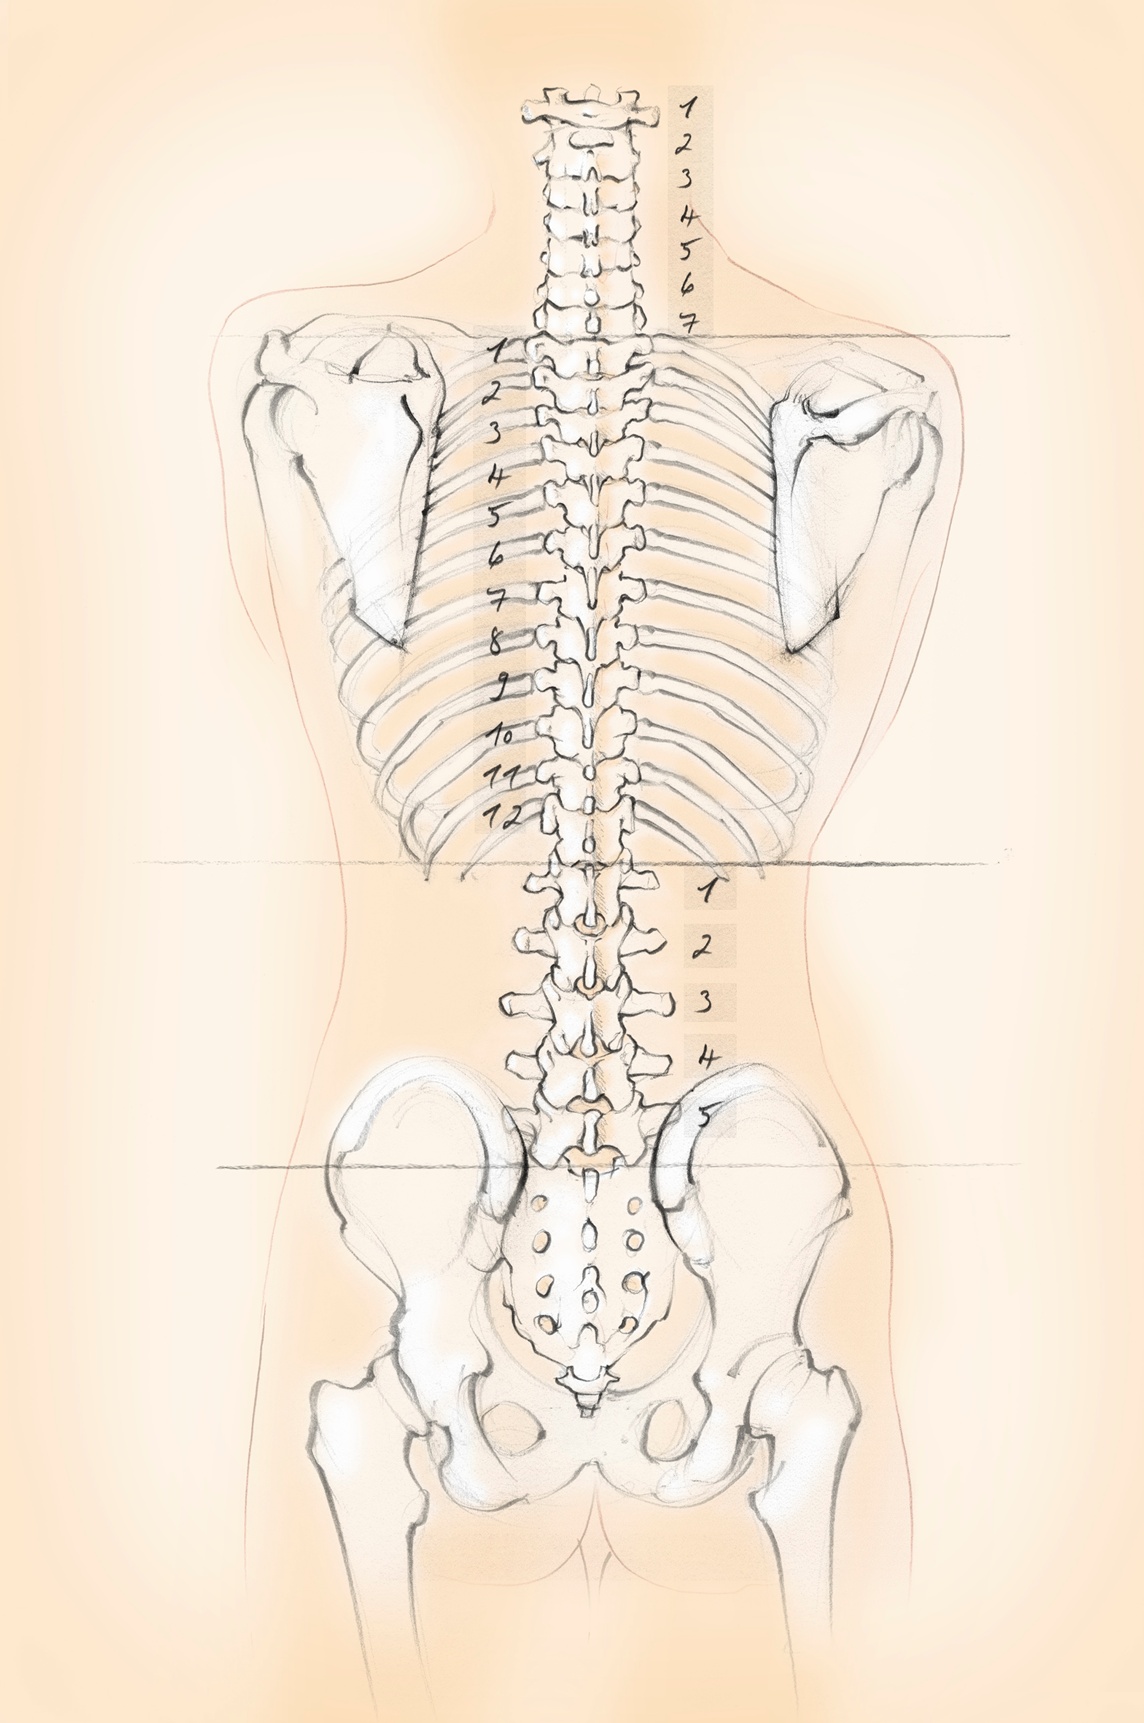 Diagram of the human spine with numbers for cervical, thoracic and